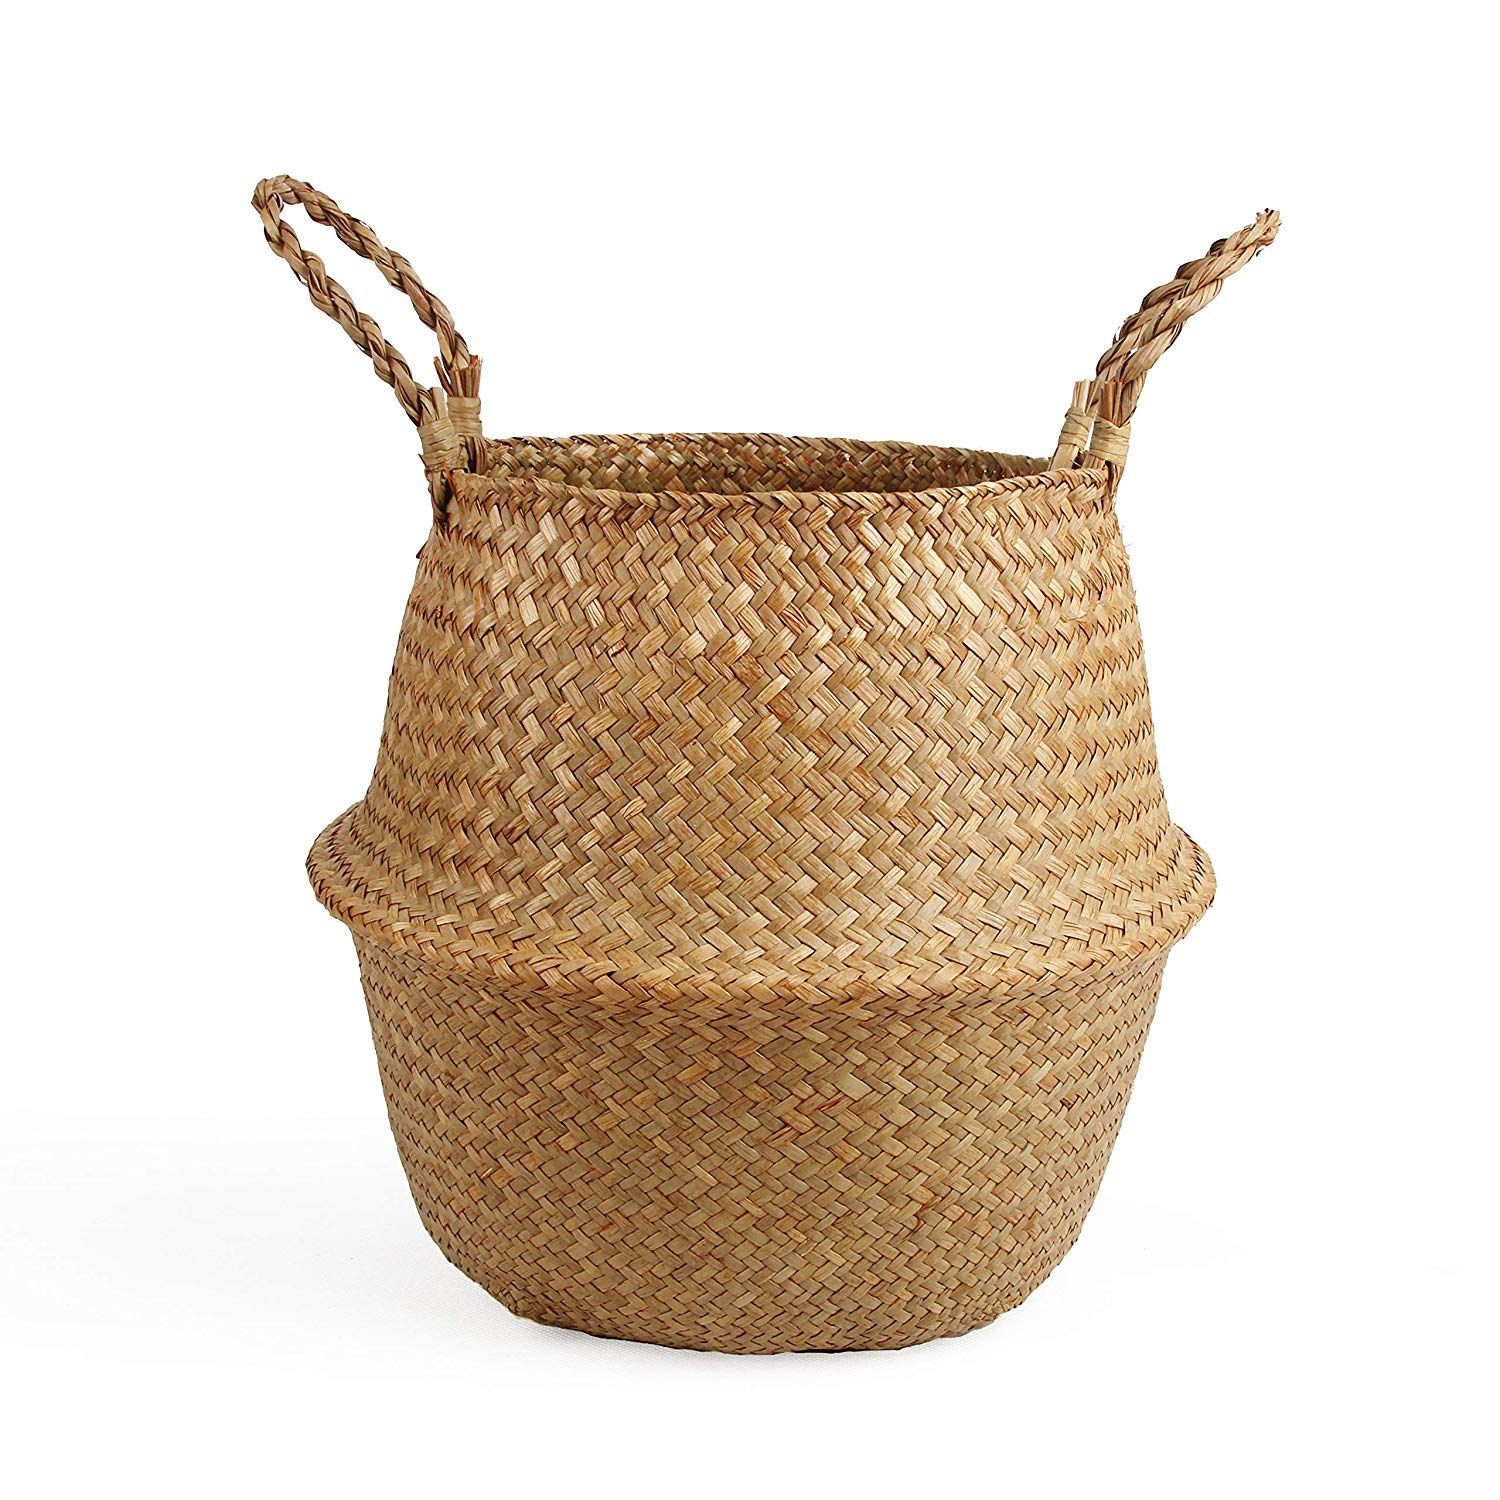 BlueMake Woven Seagrass Belly Basket for Storage Plant Pot Basket and Laundry, Picnic and Grocery Ba | Amazon (US)